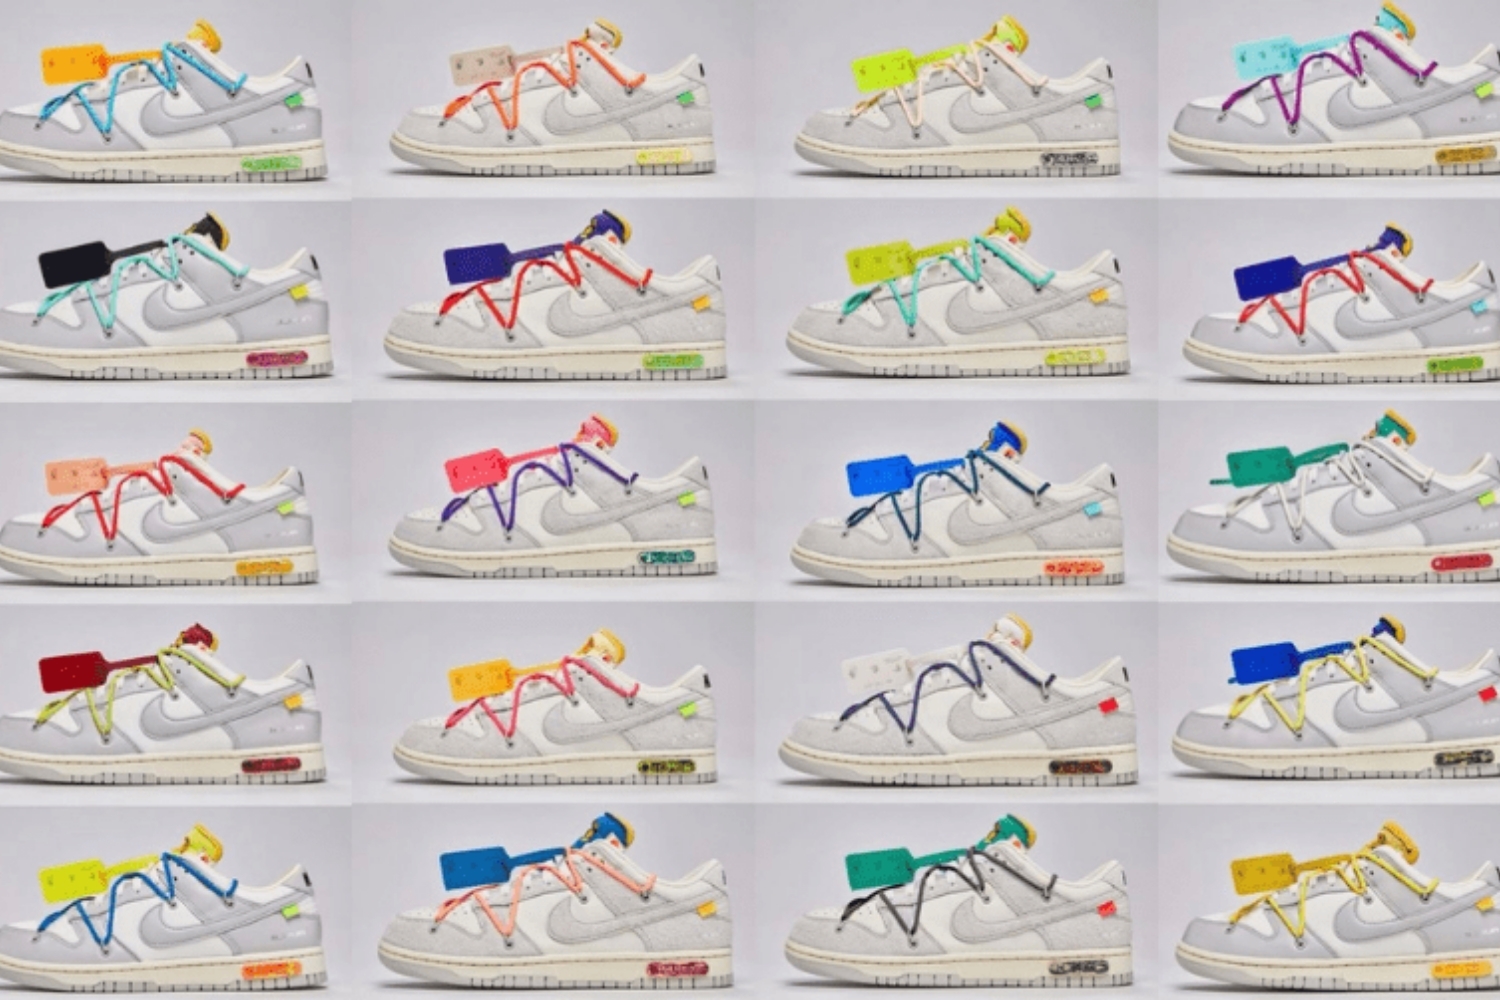 Virgil Abloh to release 50 different Off-White x Nike Dunks this year